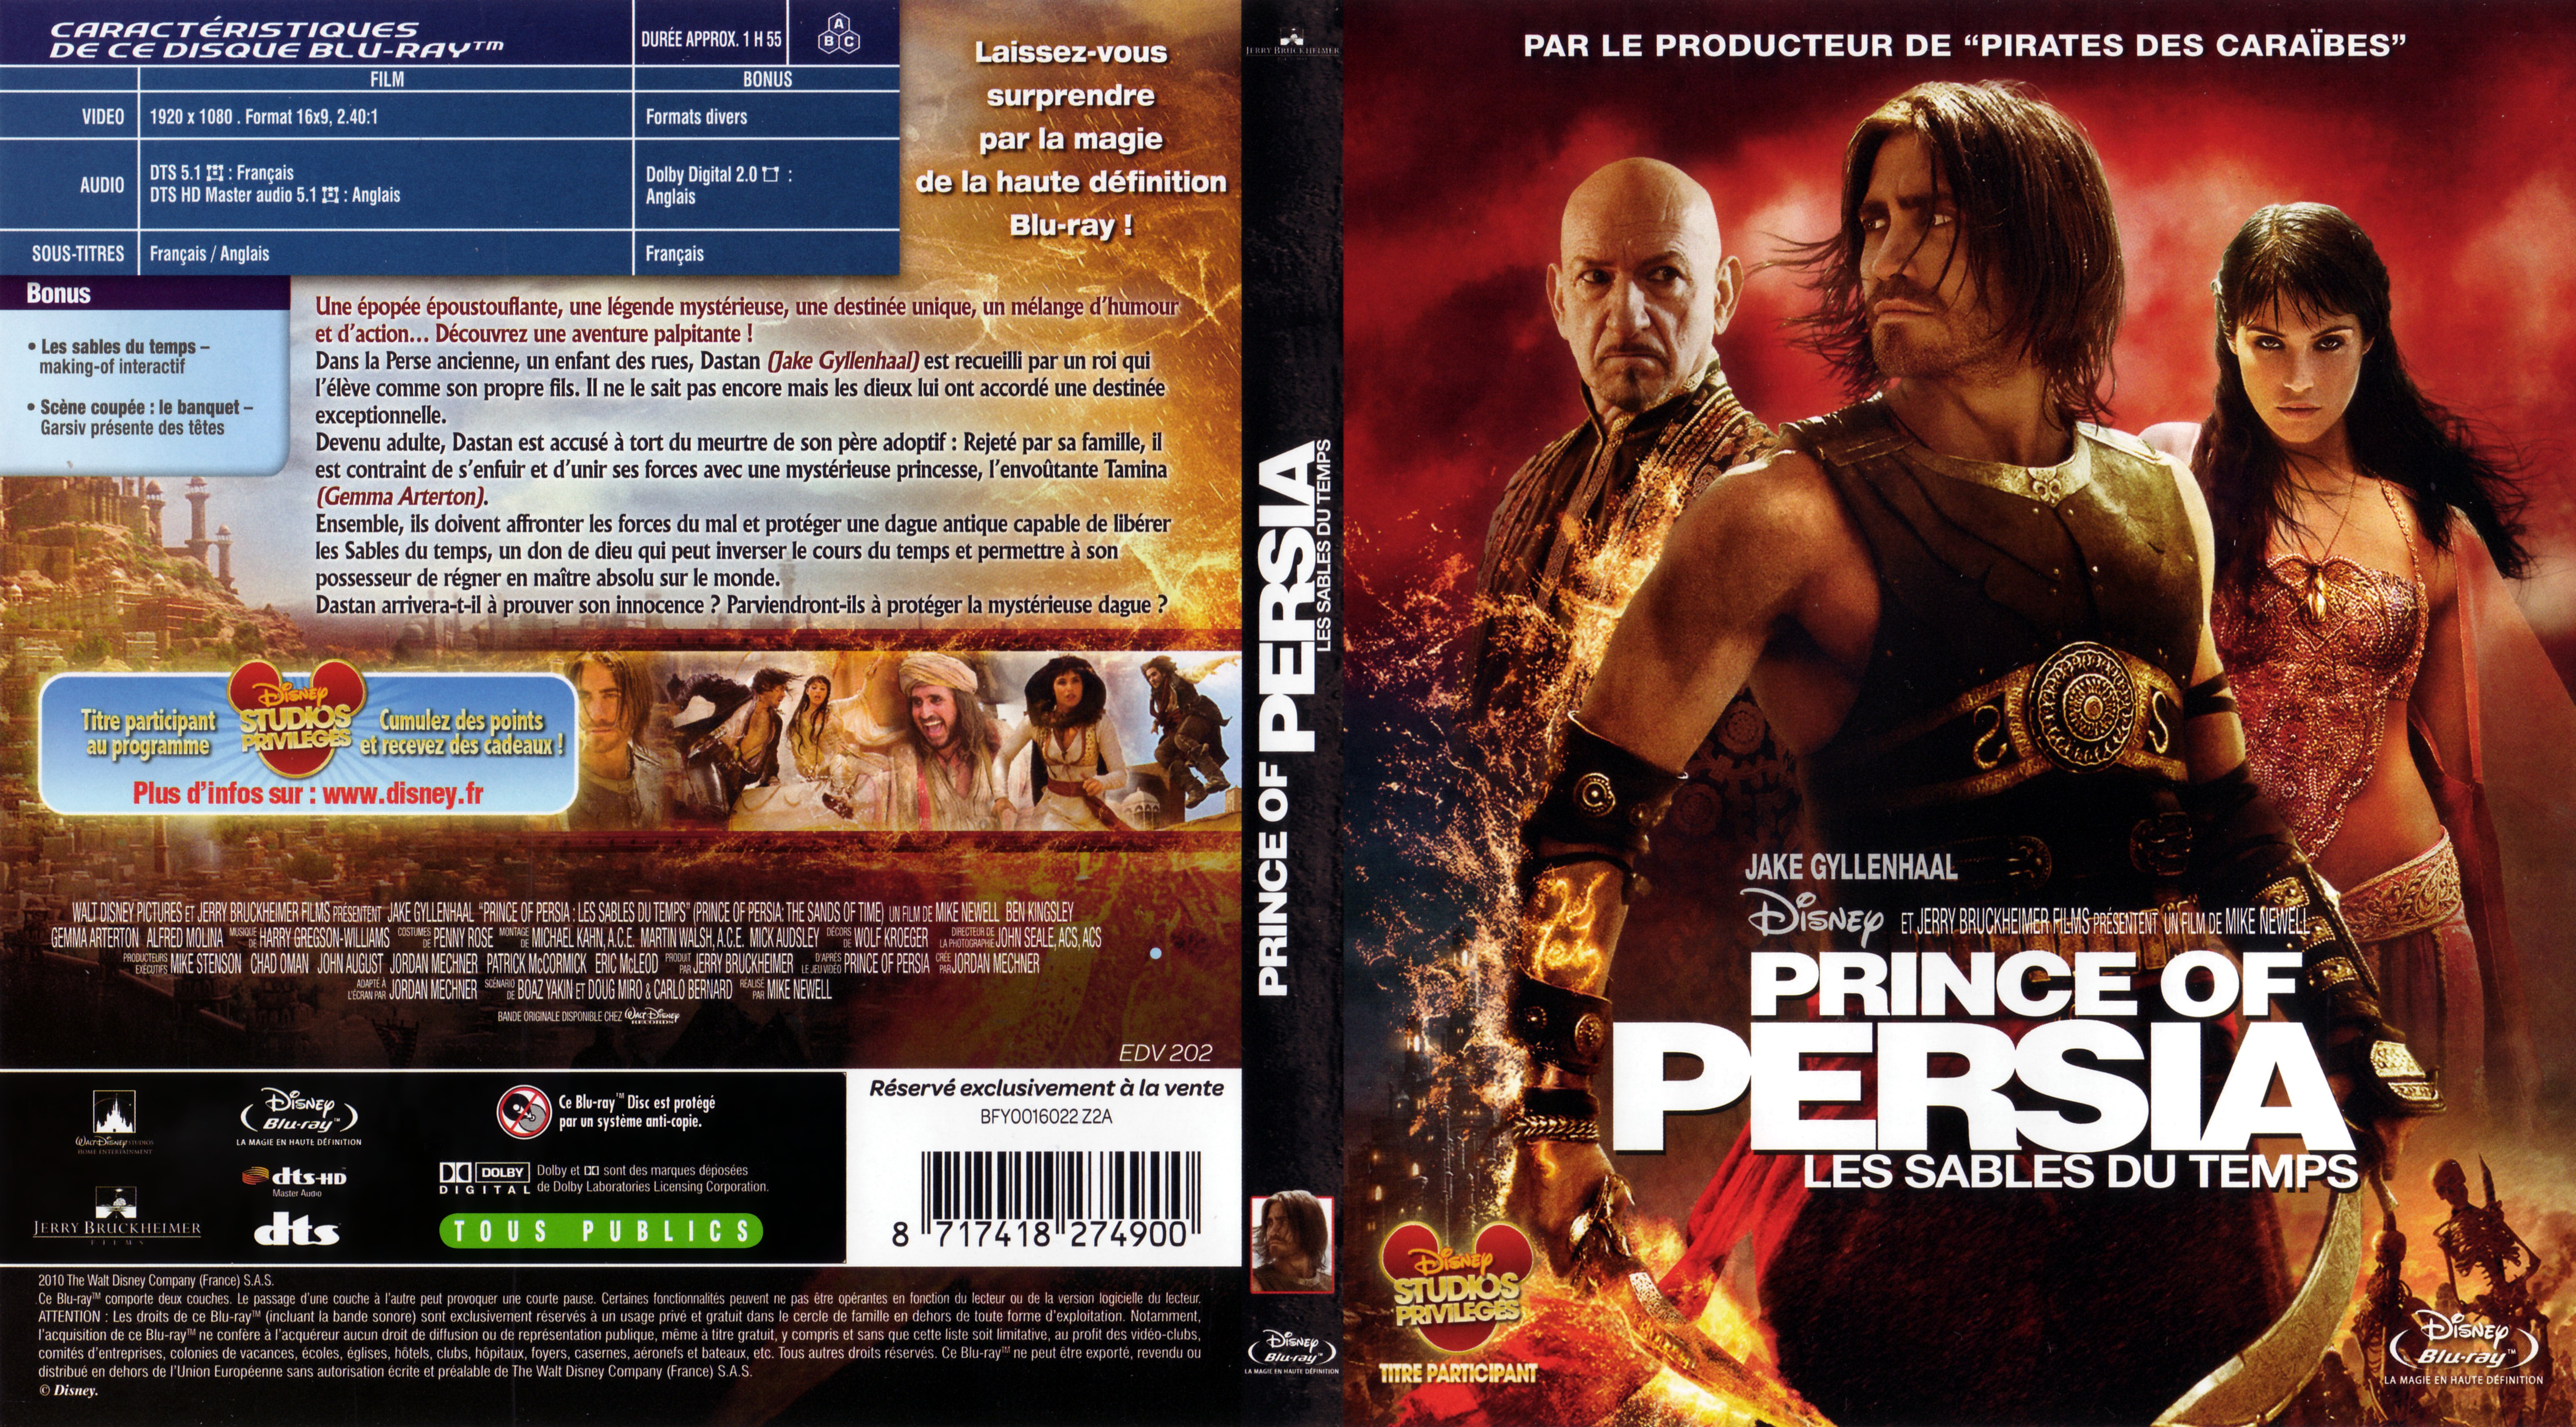 Jaquette DVD Prince of persia - les sables du temps (BLU-RAY)